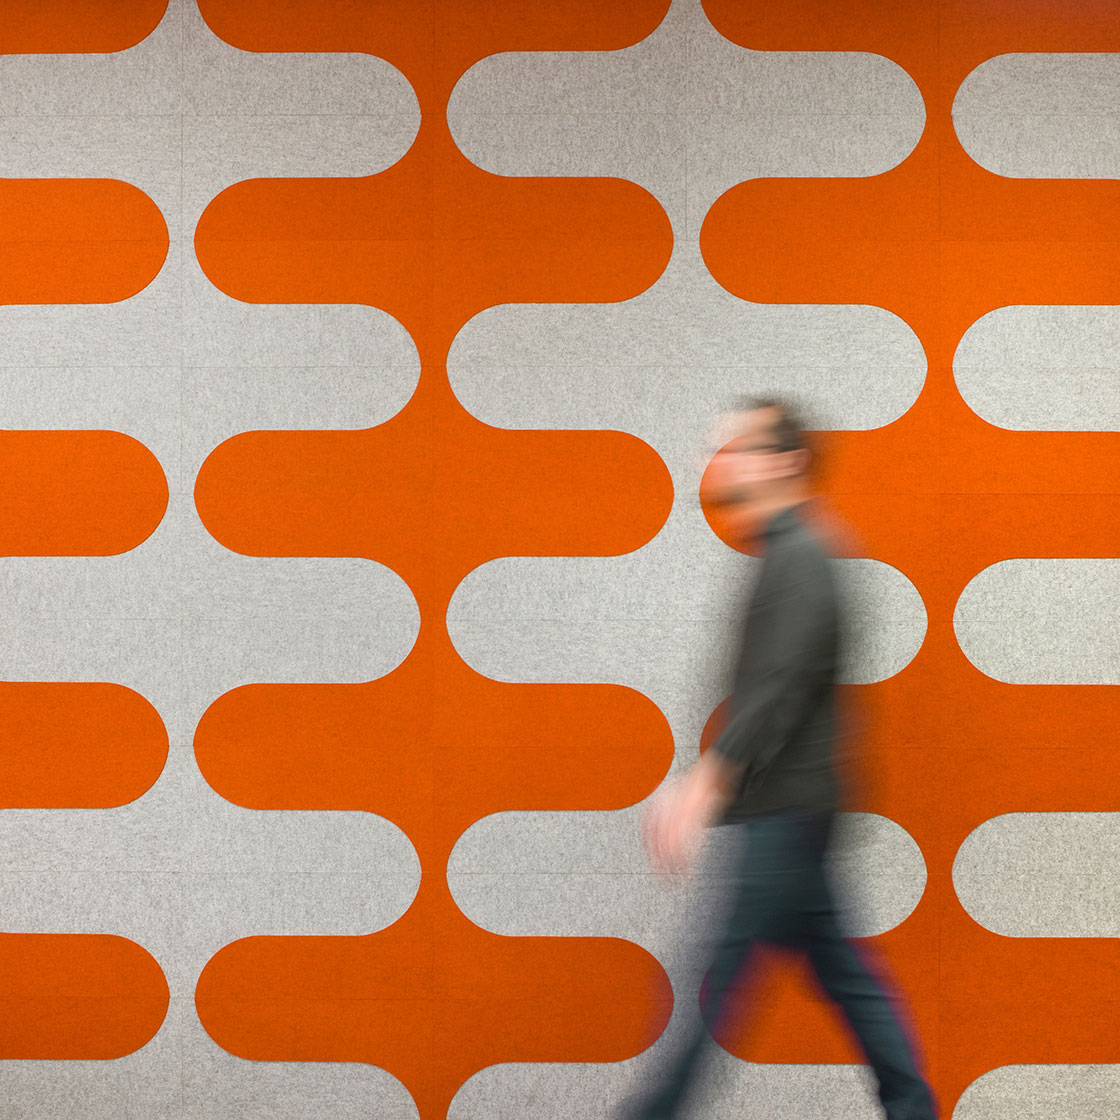 A man blurred by motion walks in front of a felt wall in gray and orange with a curvy 60s style pattern.